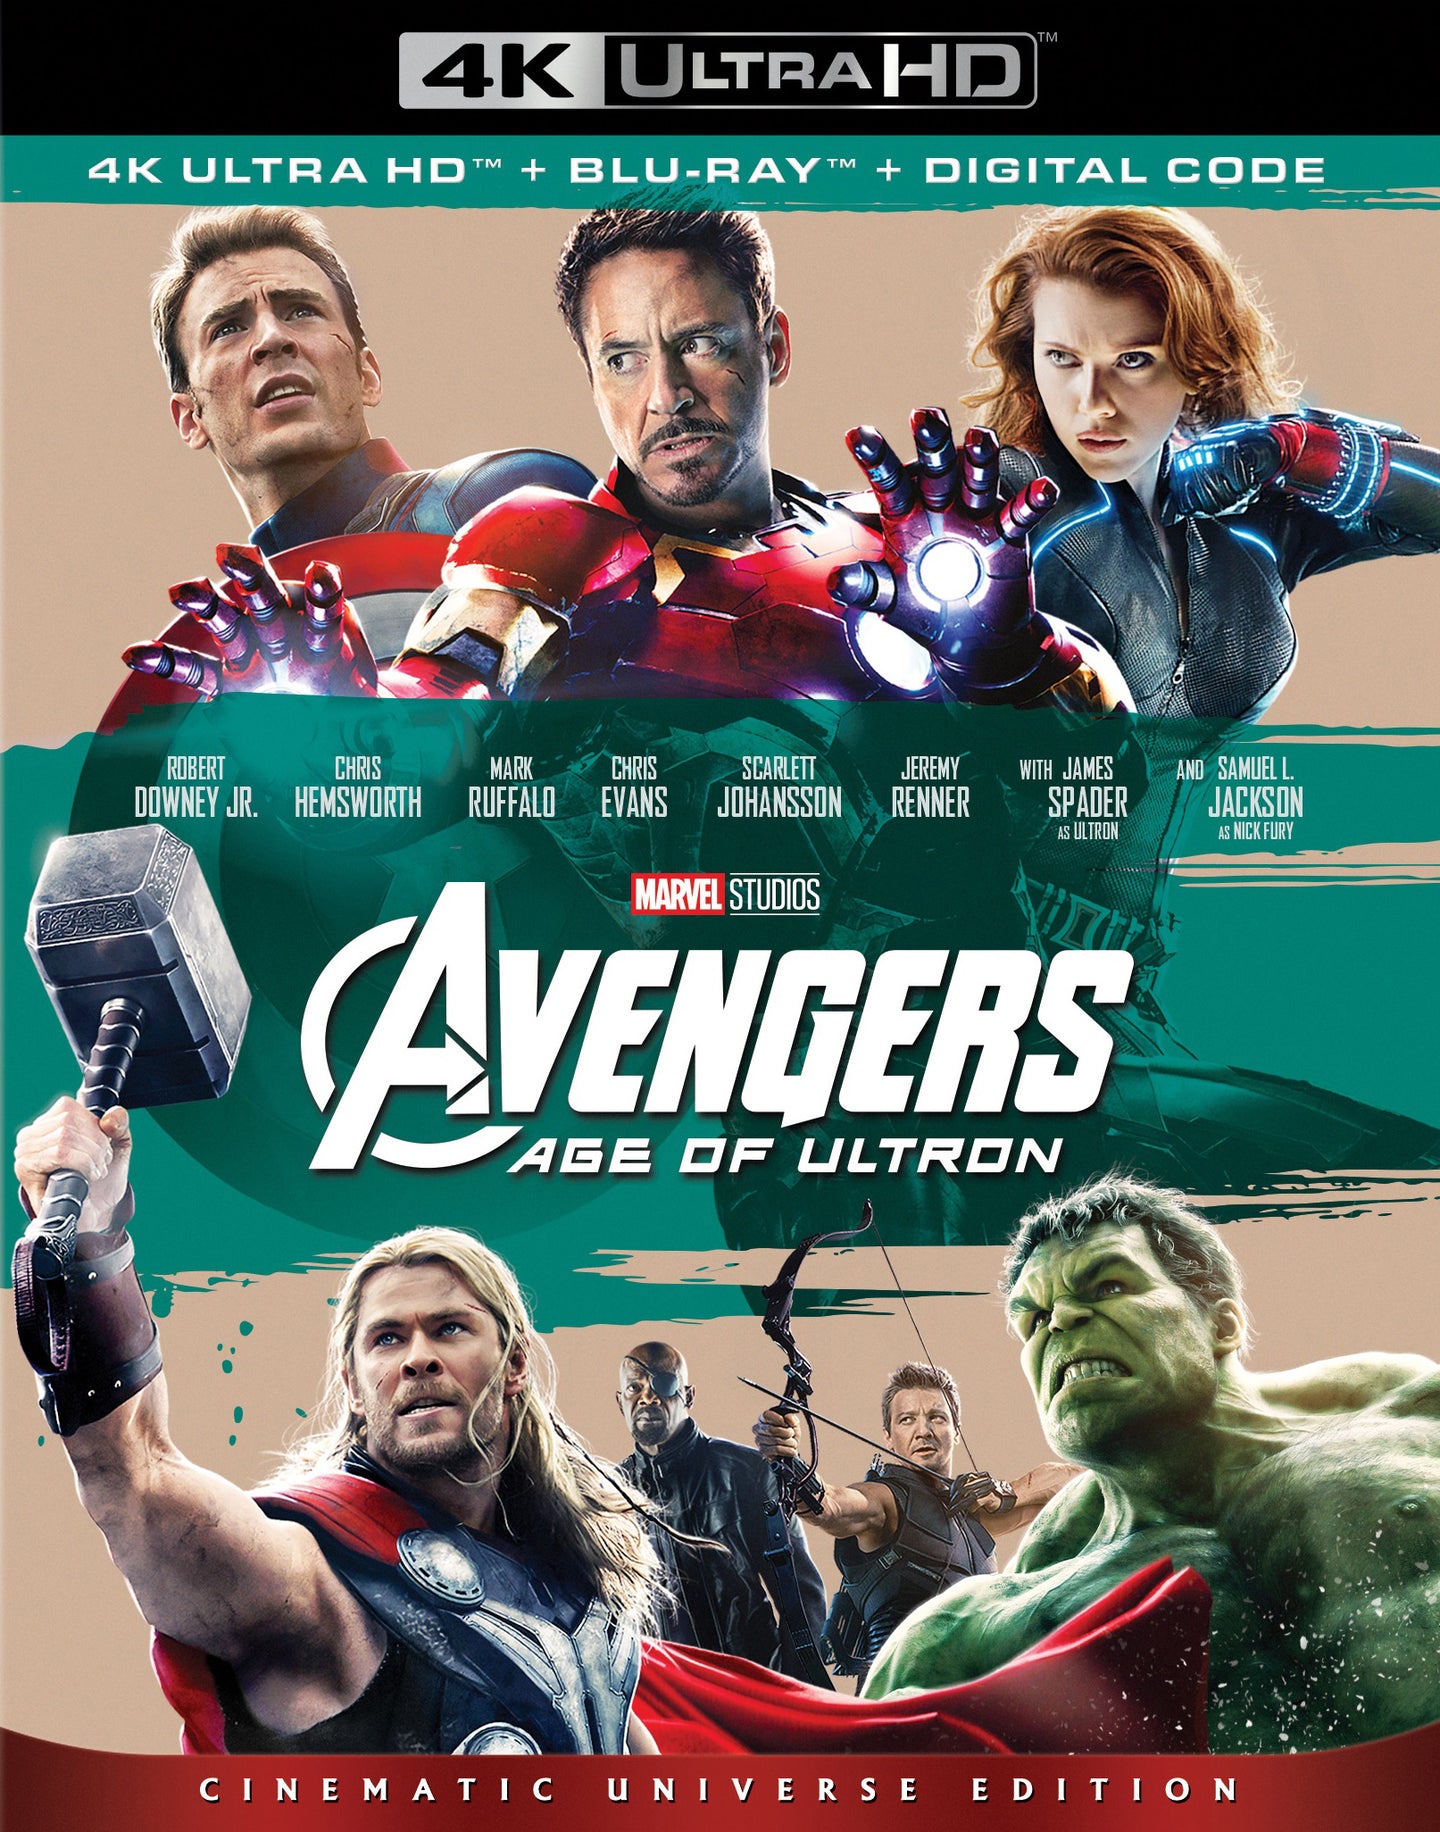 The Avengers: Age of Ultron (2015) Vudu or Movies Anywhere 4K redemption only